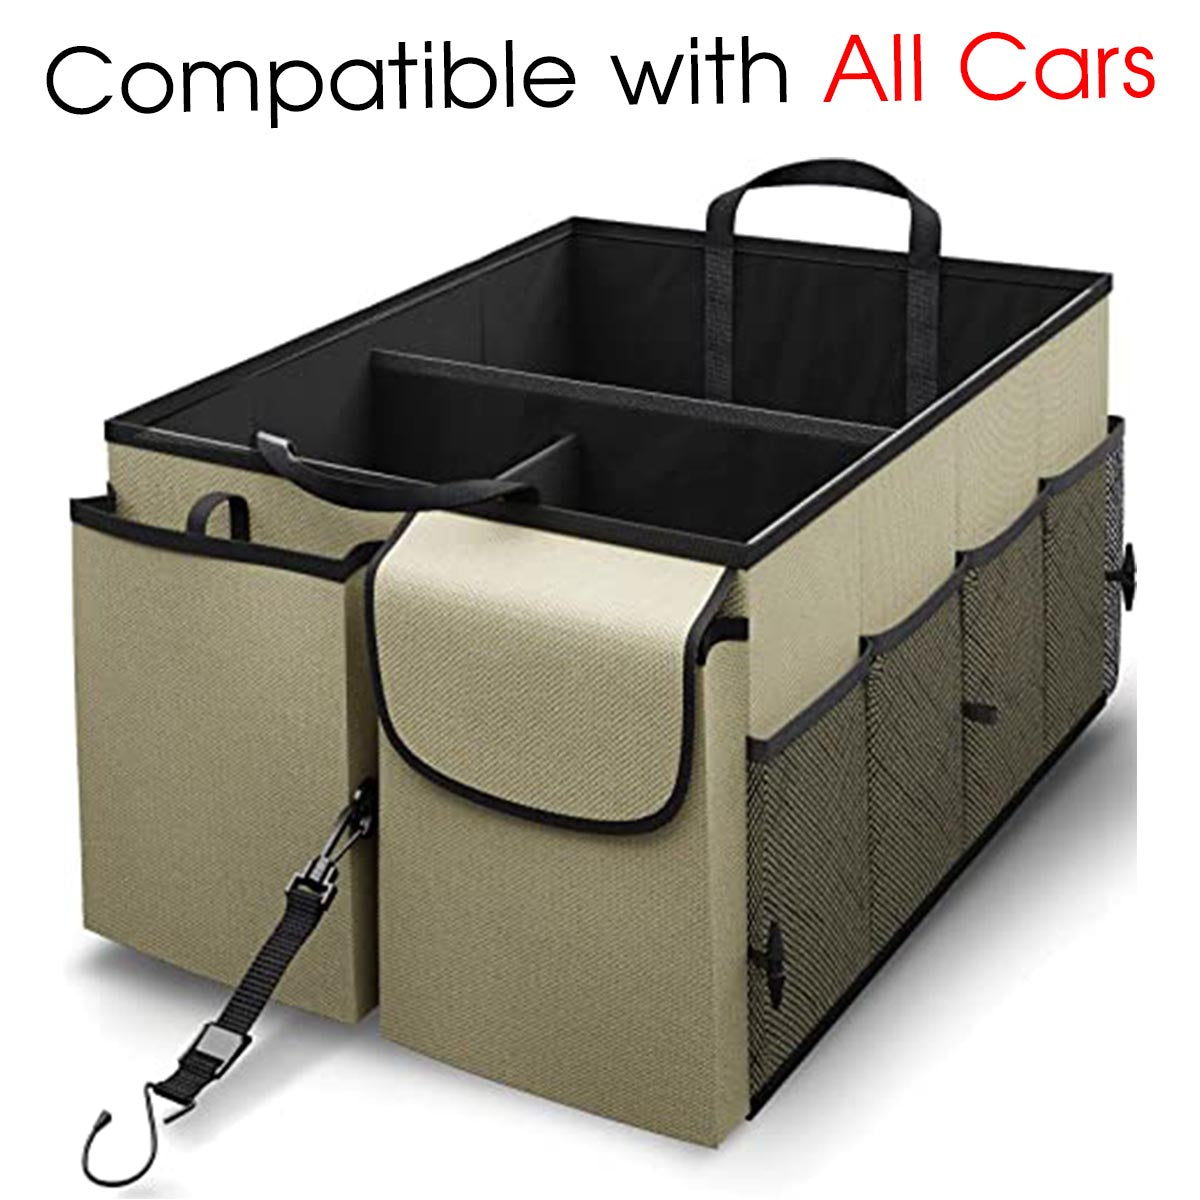 Car Trunk Organizer - Collapsible, Custom fit for All Cars, Multi-Compartment Automotive SUV Car Organizer for Storage w/ Adjustable Straps - Car Accessories for Women and Men AR12993